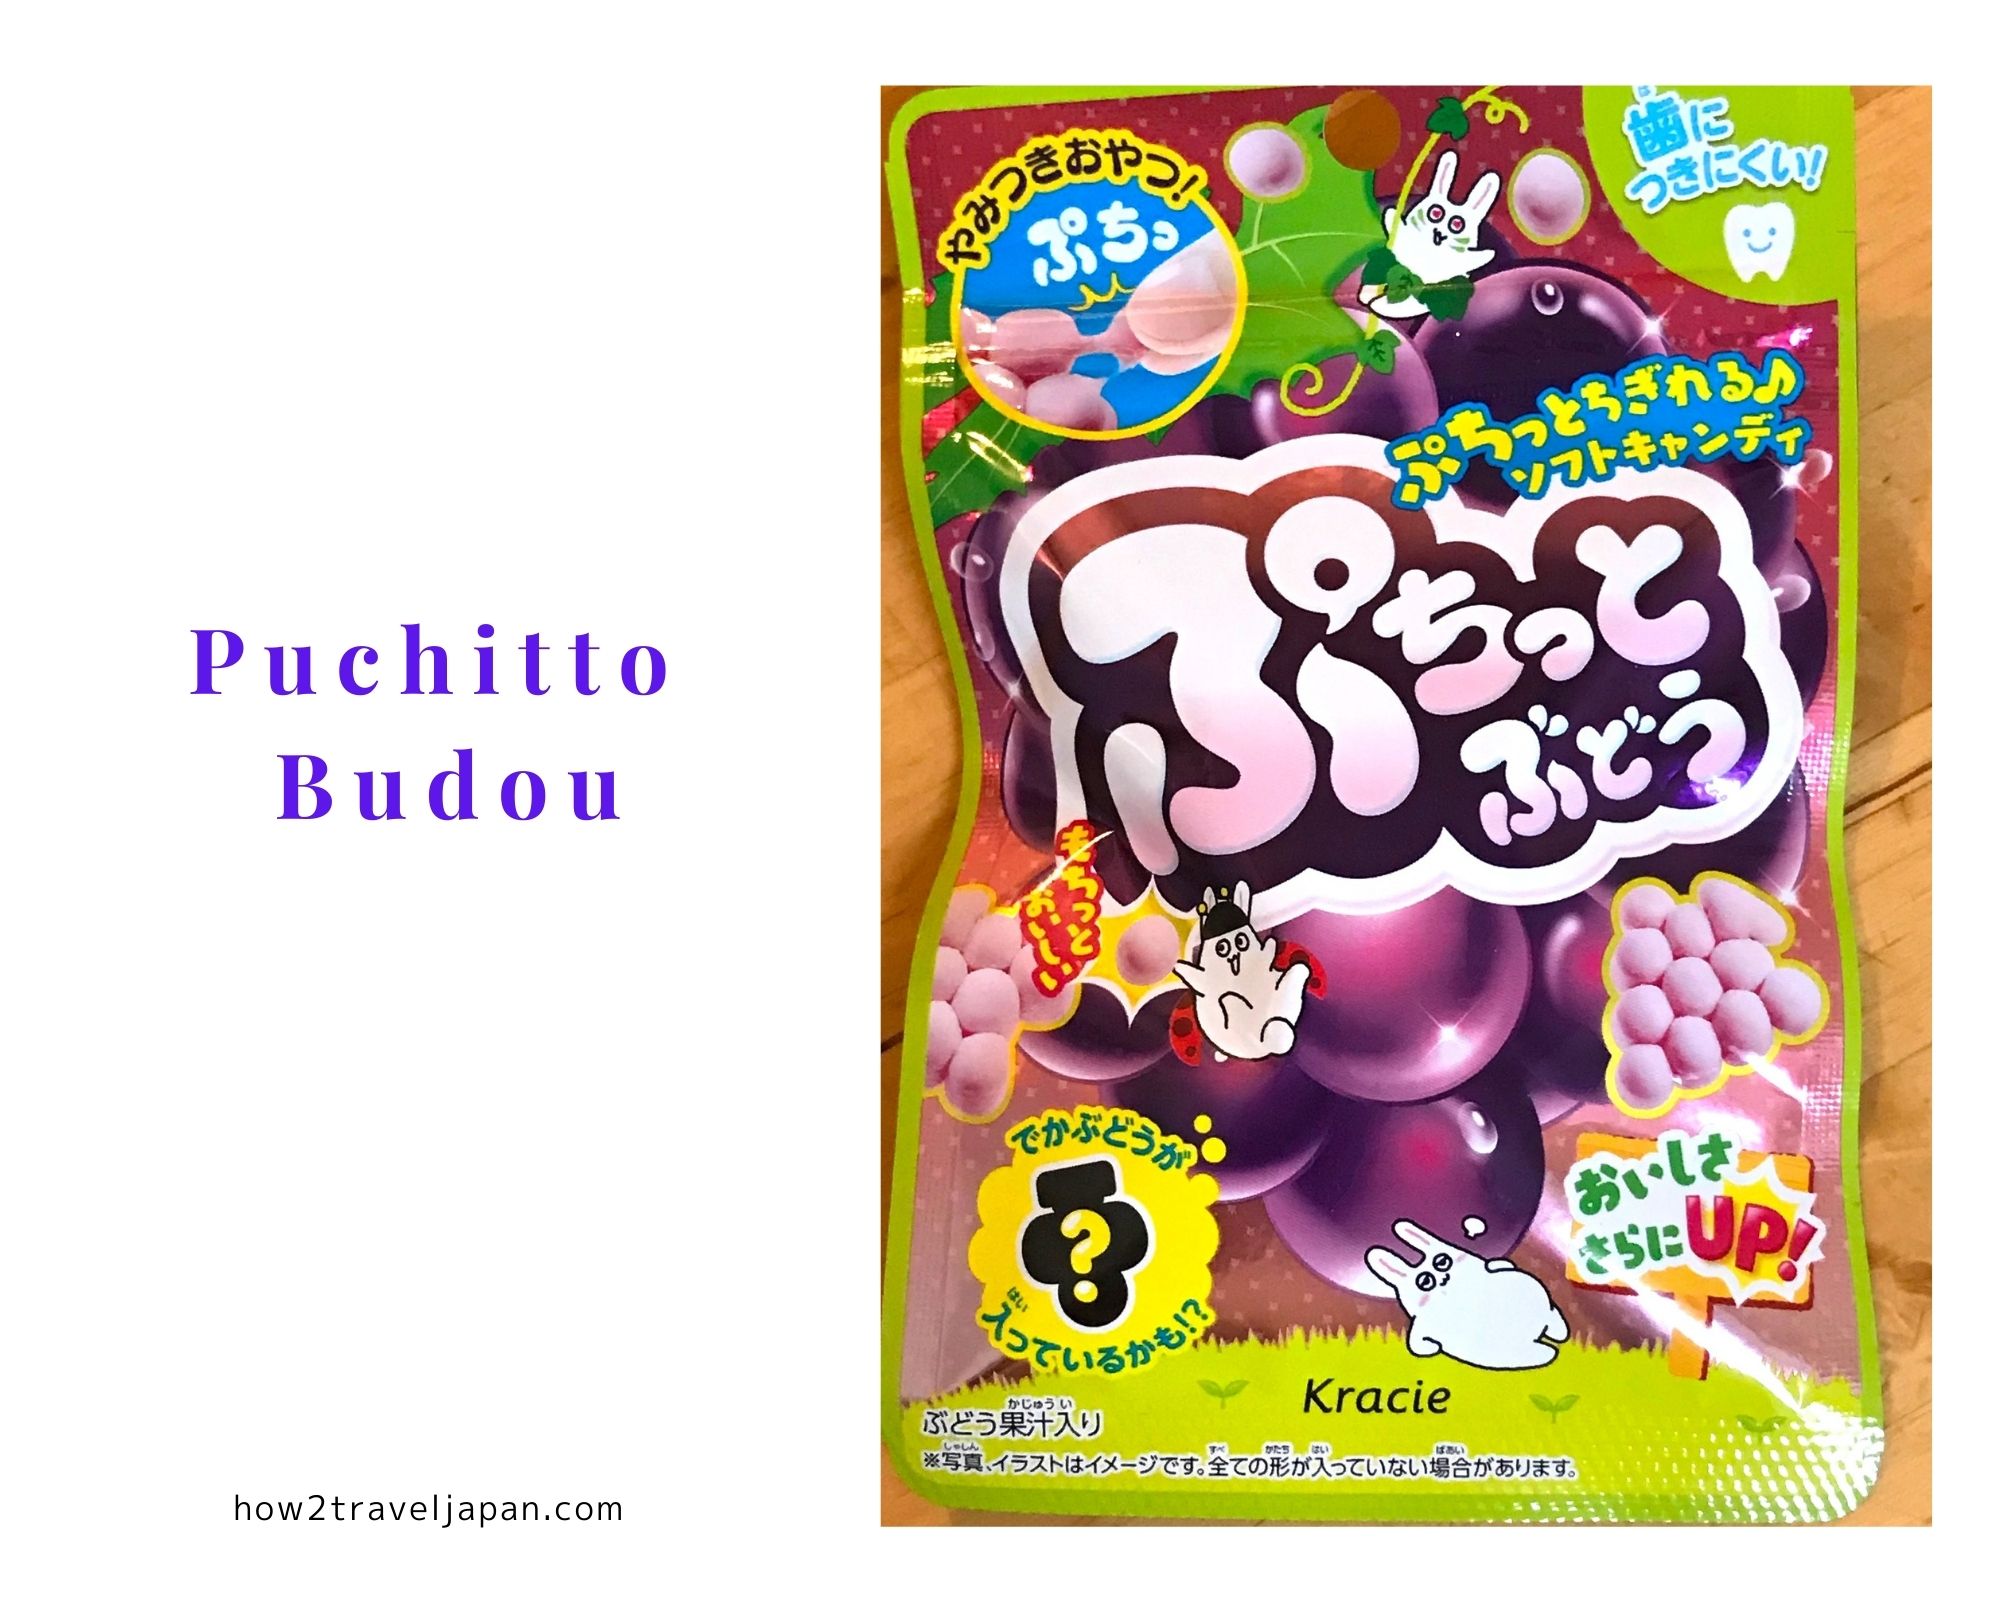 You are currently viewing Puchitto Budou from Kracie